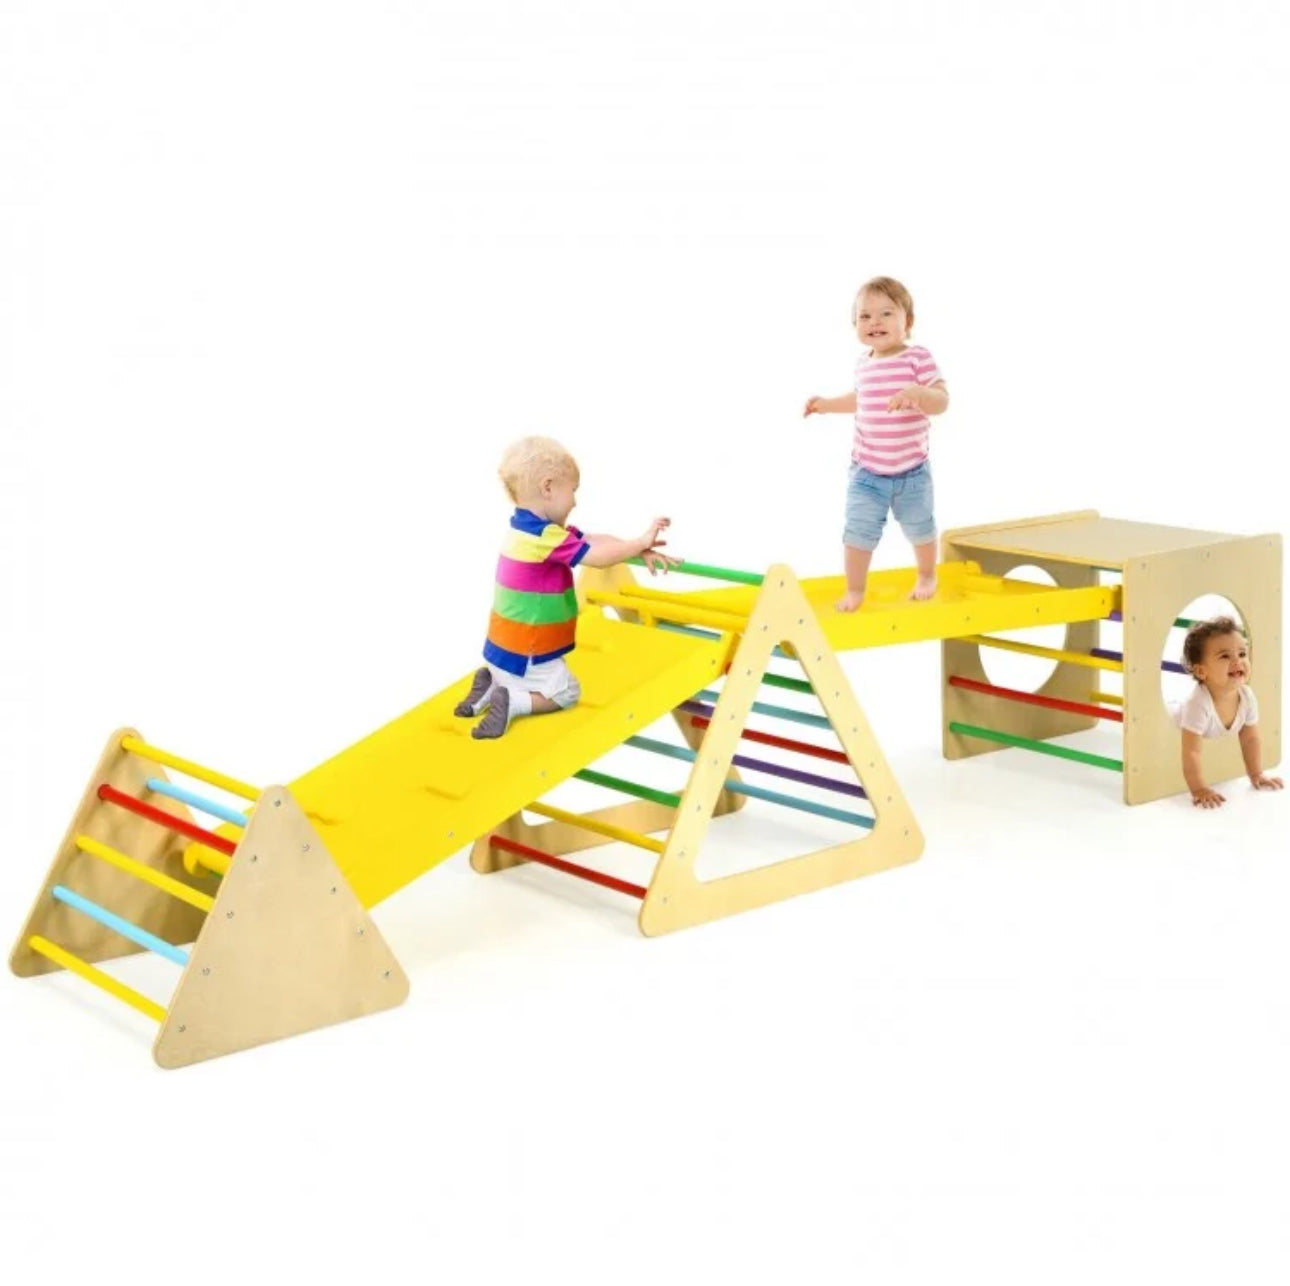 Super Adorable Heavy duty 5-in-1 Rectangle | Triangle Fun Playground Set | With 2 Playful Ramps | For Hours Of Fun